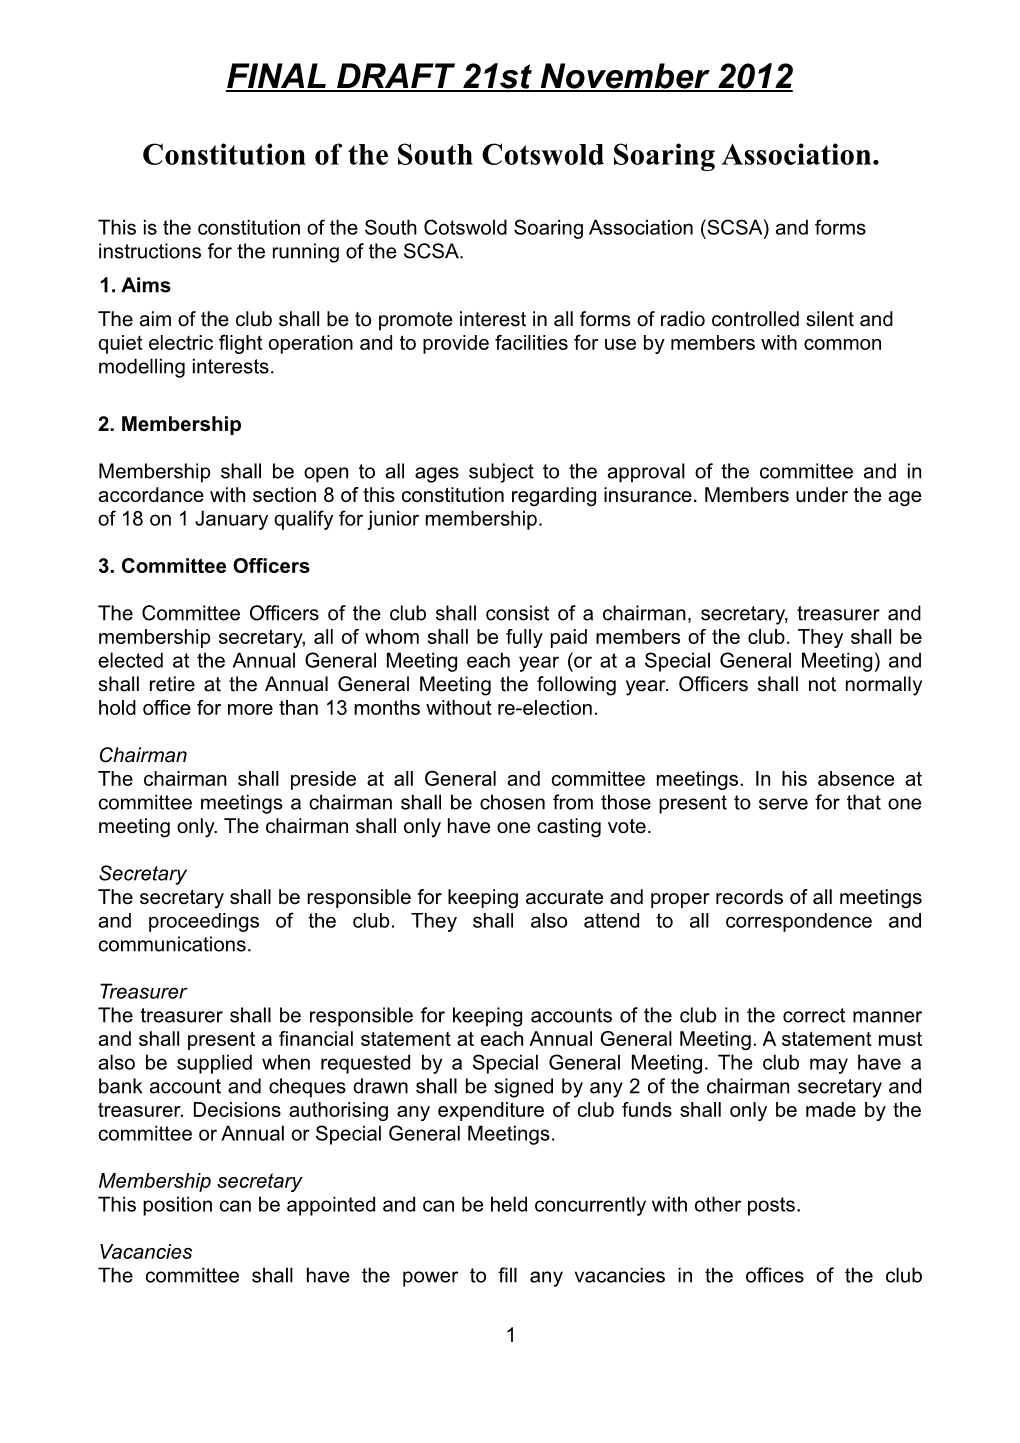 Constitution of the South Cotswold Soaring Association